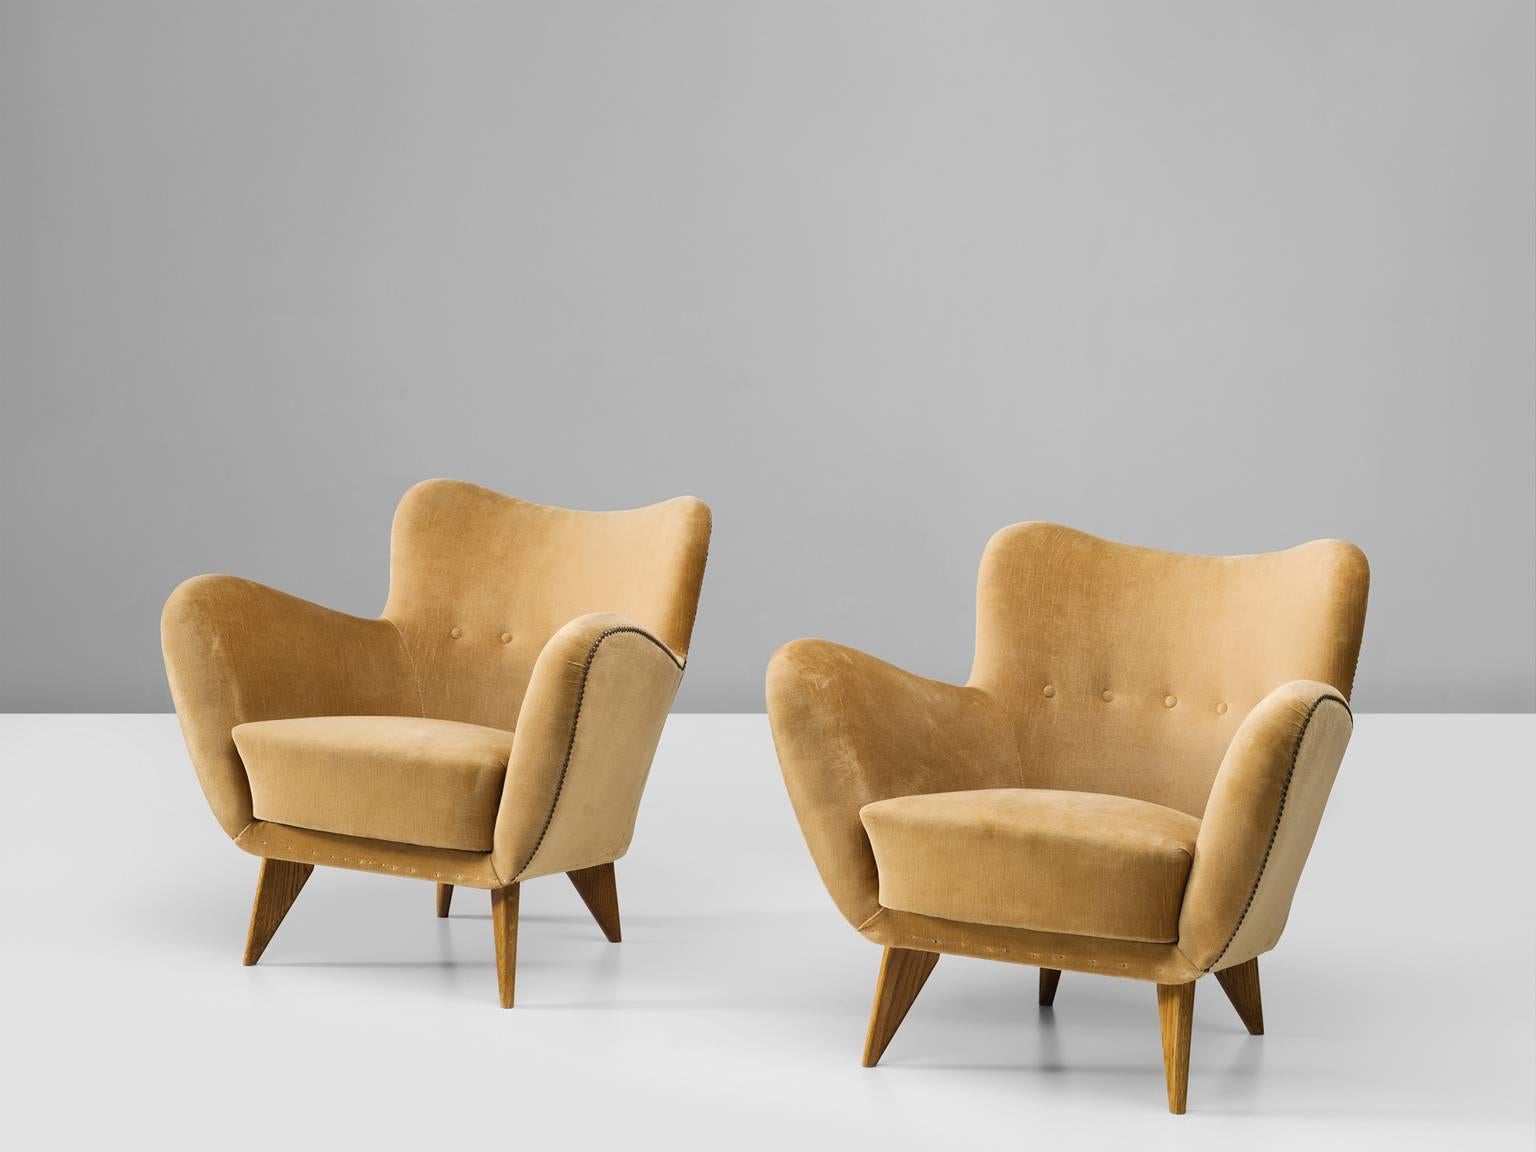 Lounge chairs by Guglielmo Veronesi for I.S.A Bergamo, walnut, brass, fabric, Italy, 1952.

These lounge chairs are iconic examples of Italian design from the fifties. Curveous, organic and sculptural, these chairs are anything but minimalistic.